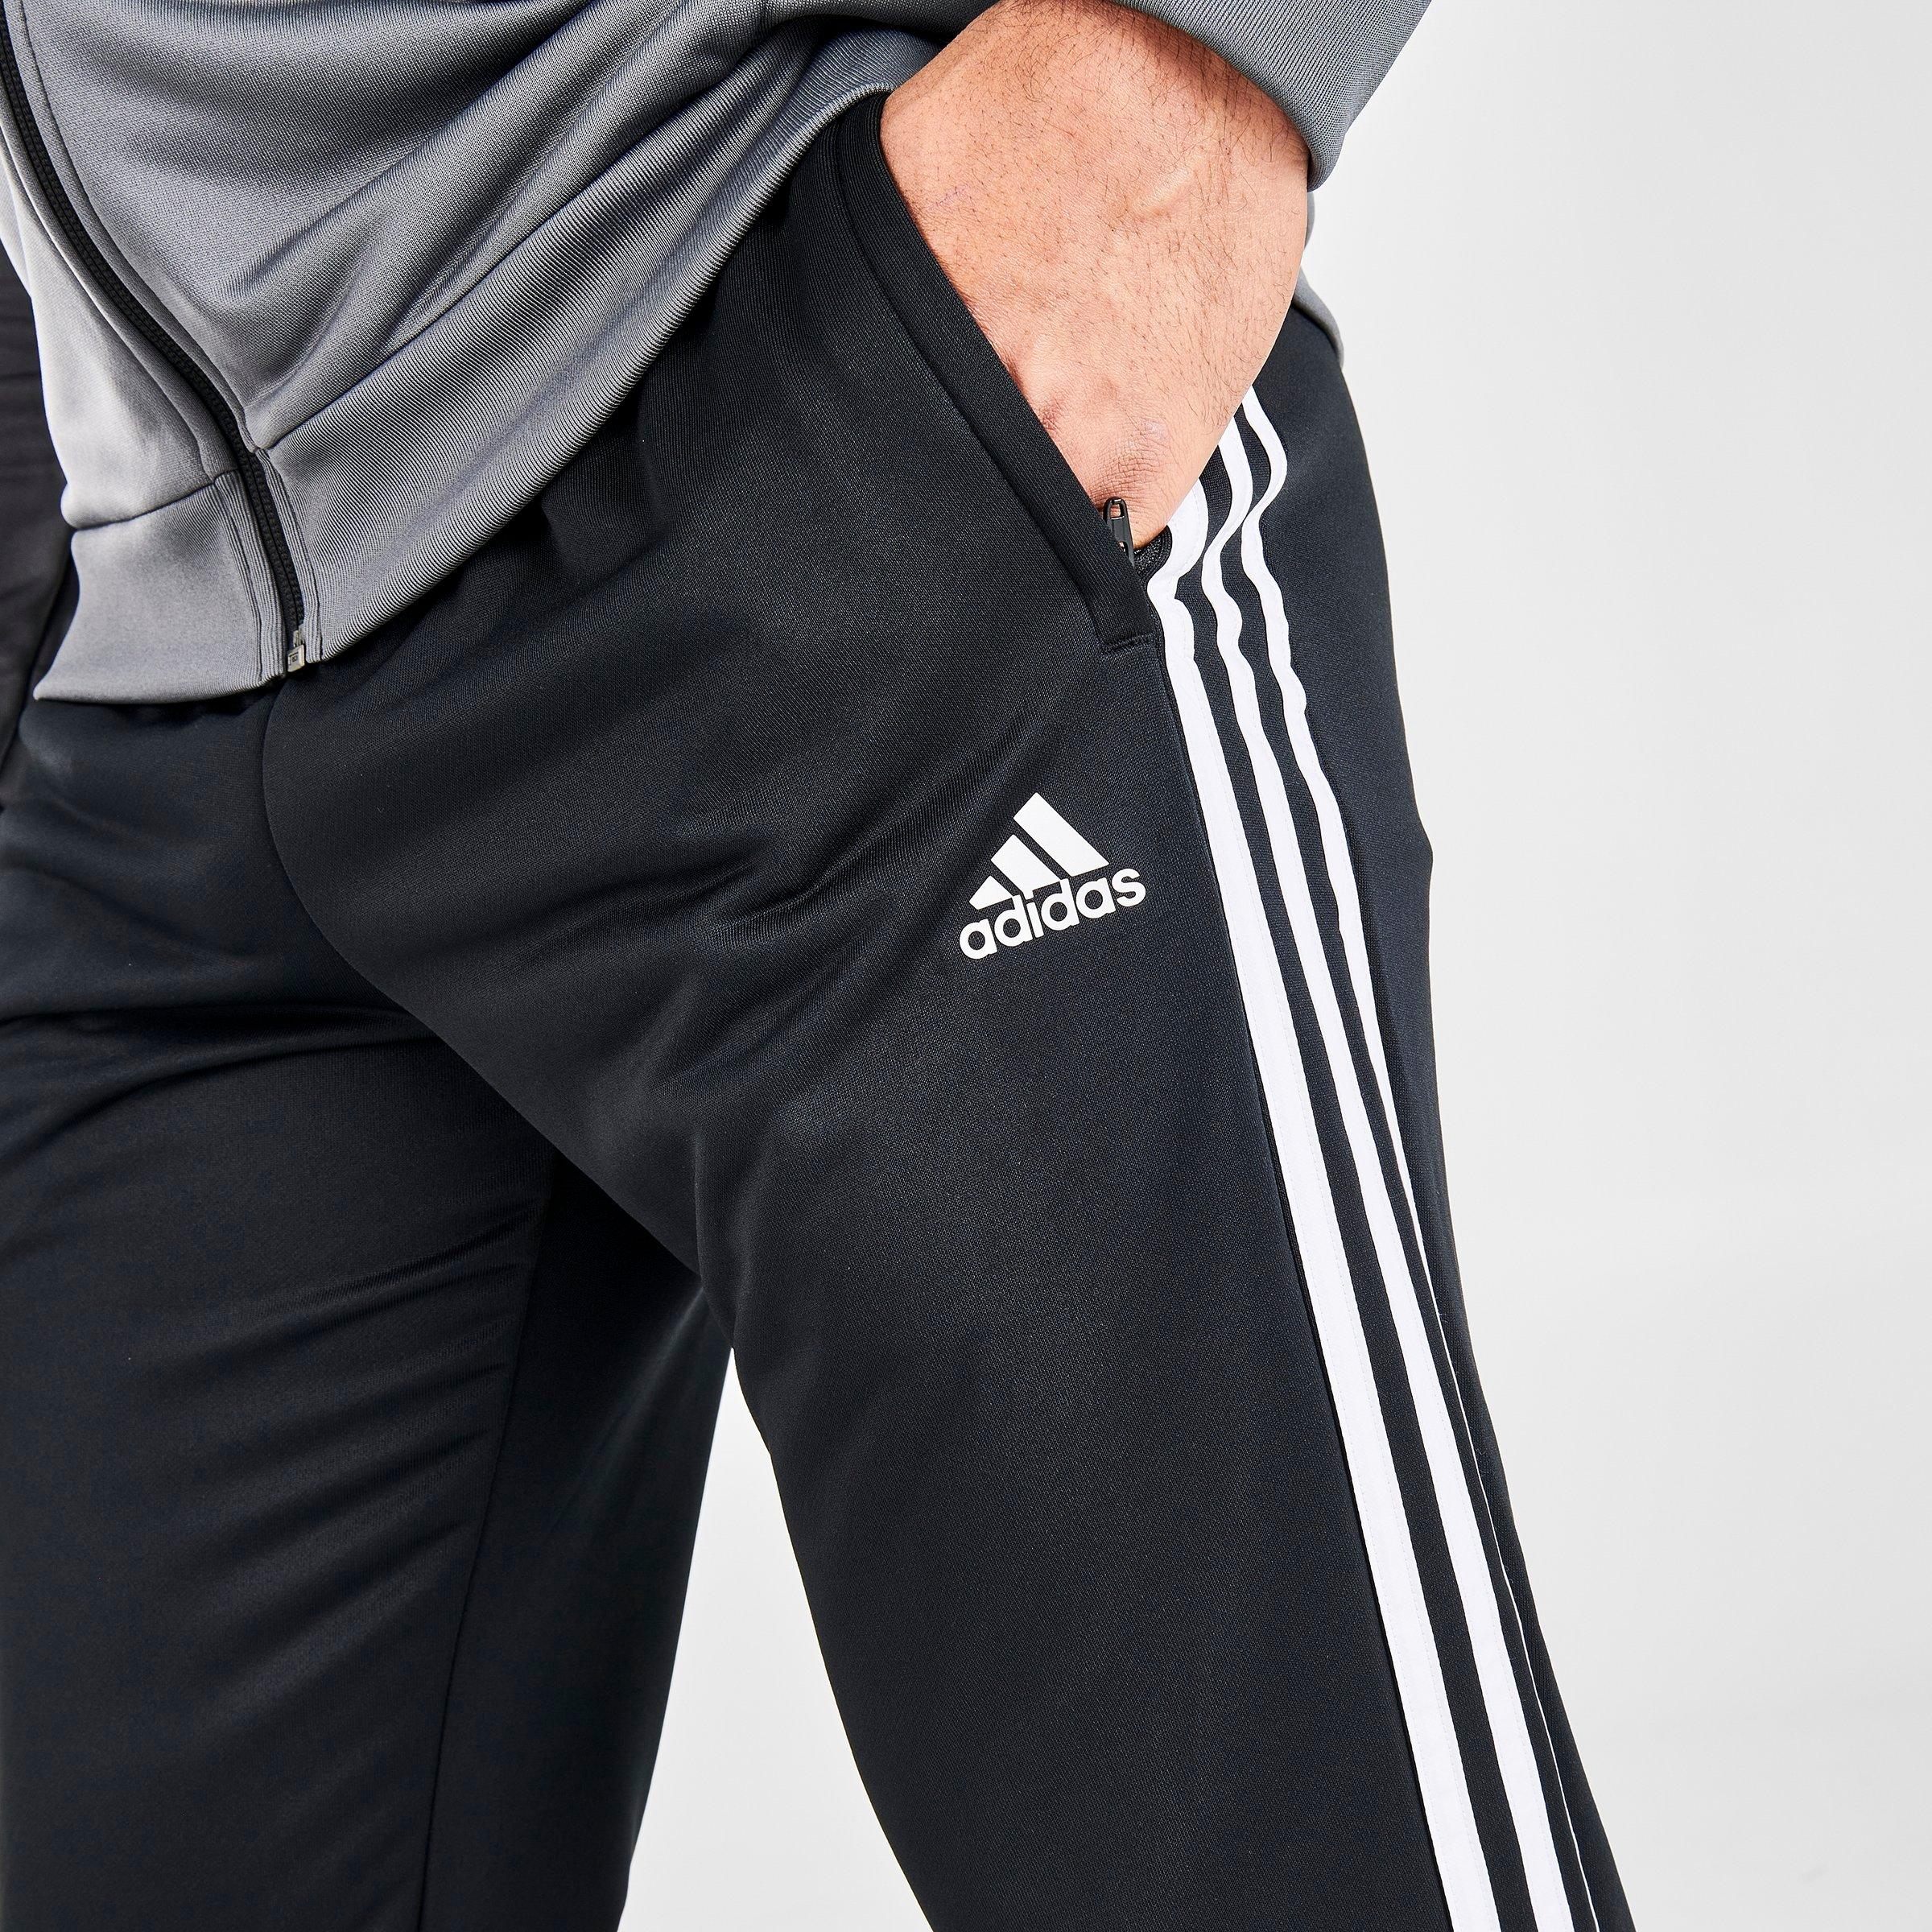 how much is adidas sweatpants